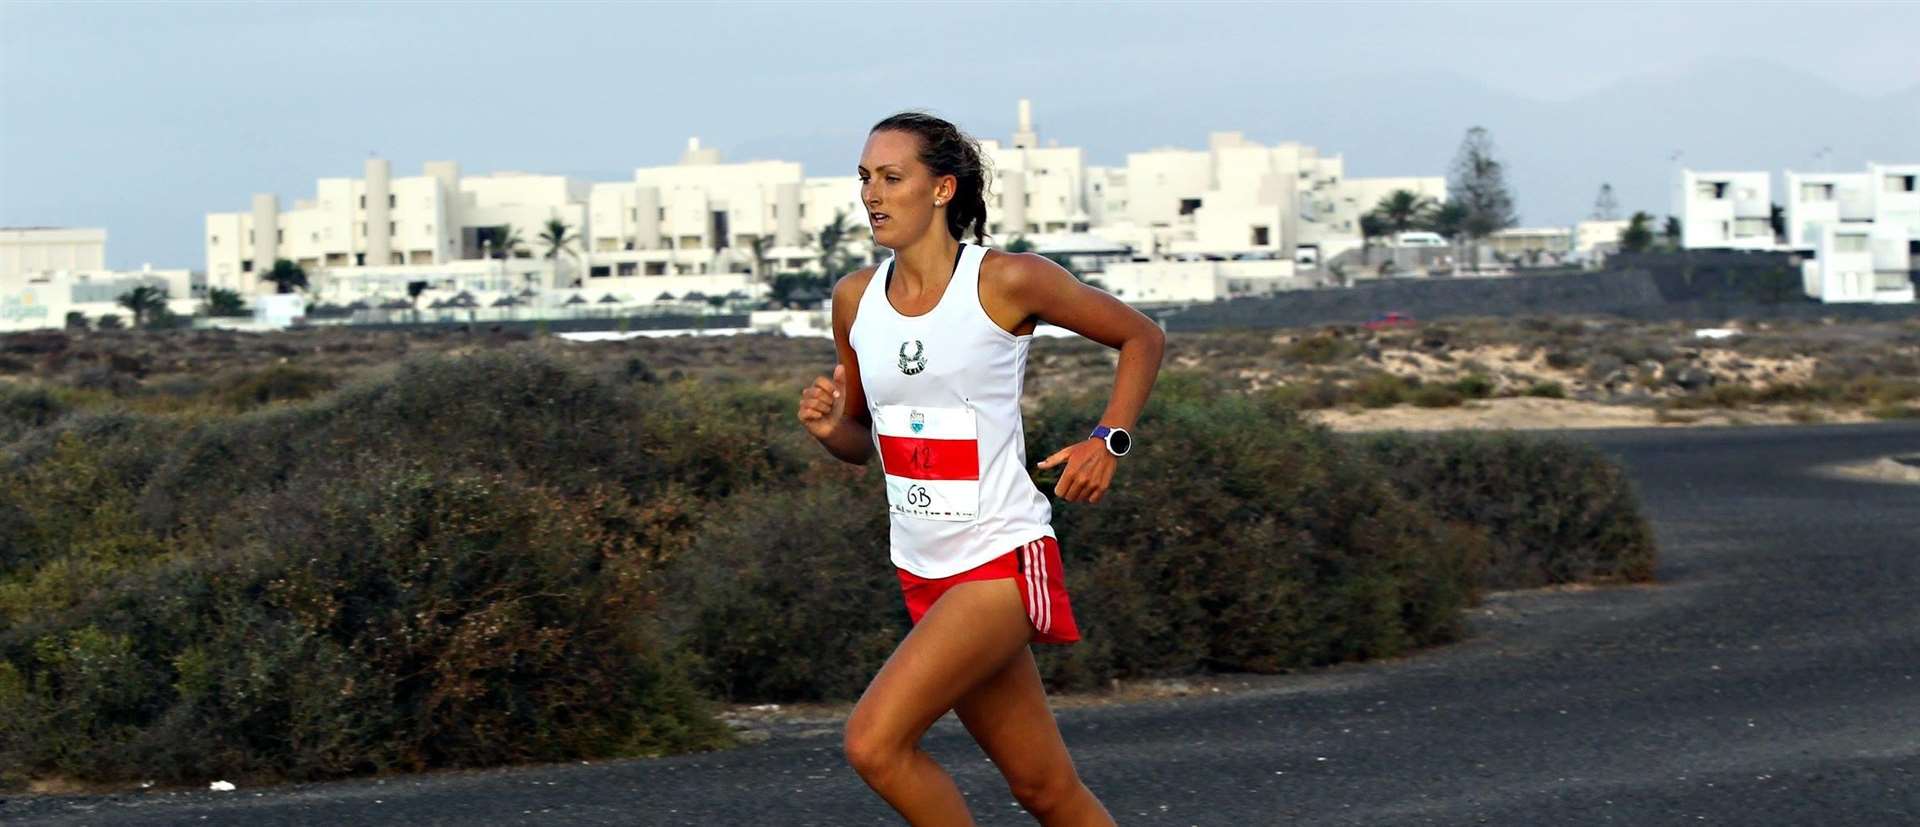 Former junior GB triathlete Kate Curran will be attempting the marathon for the first time alongside her mum, brother and boyfriend (7195858)